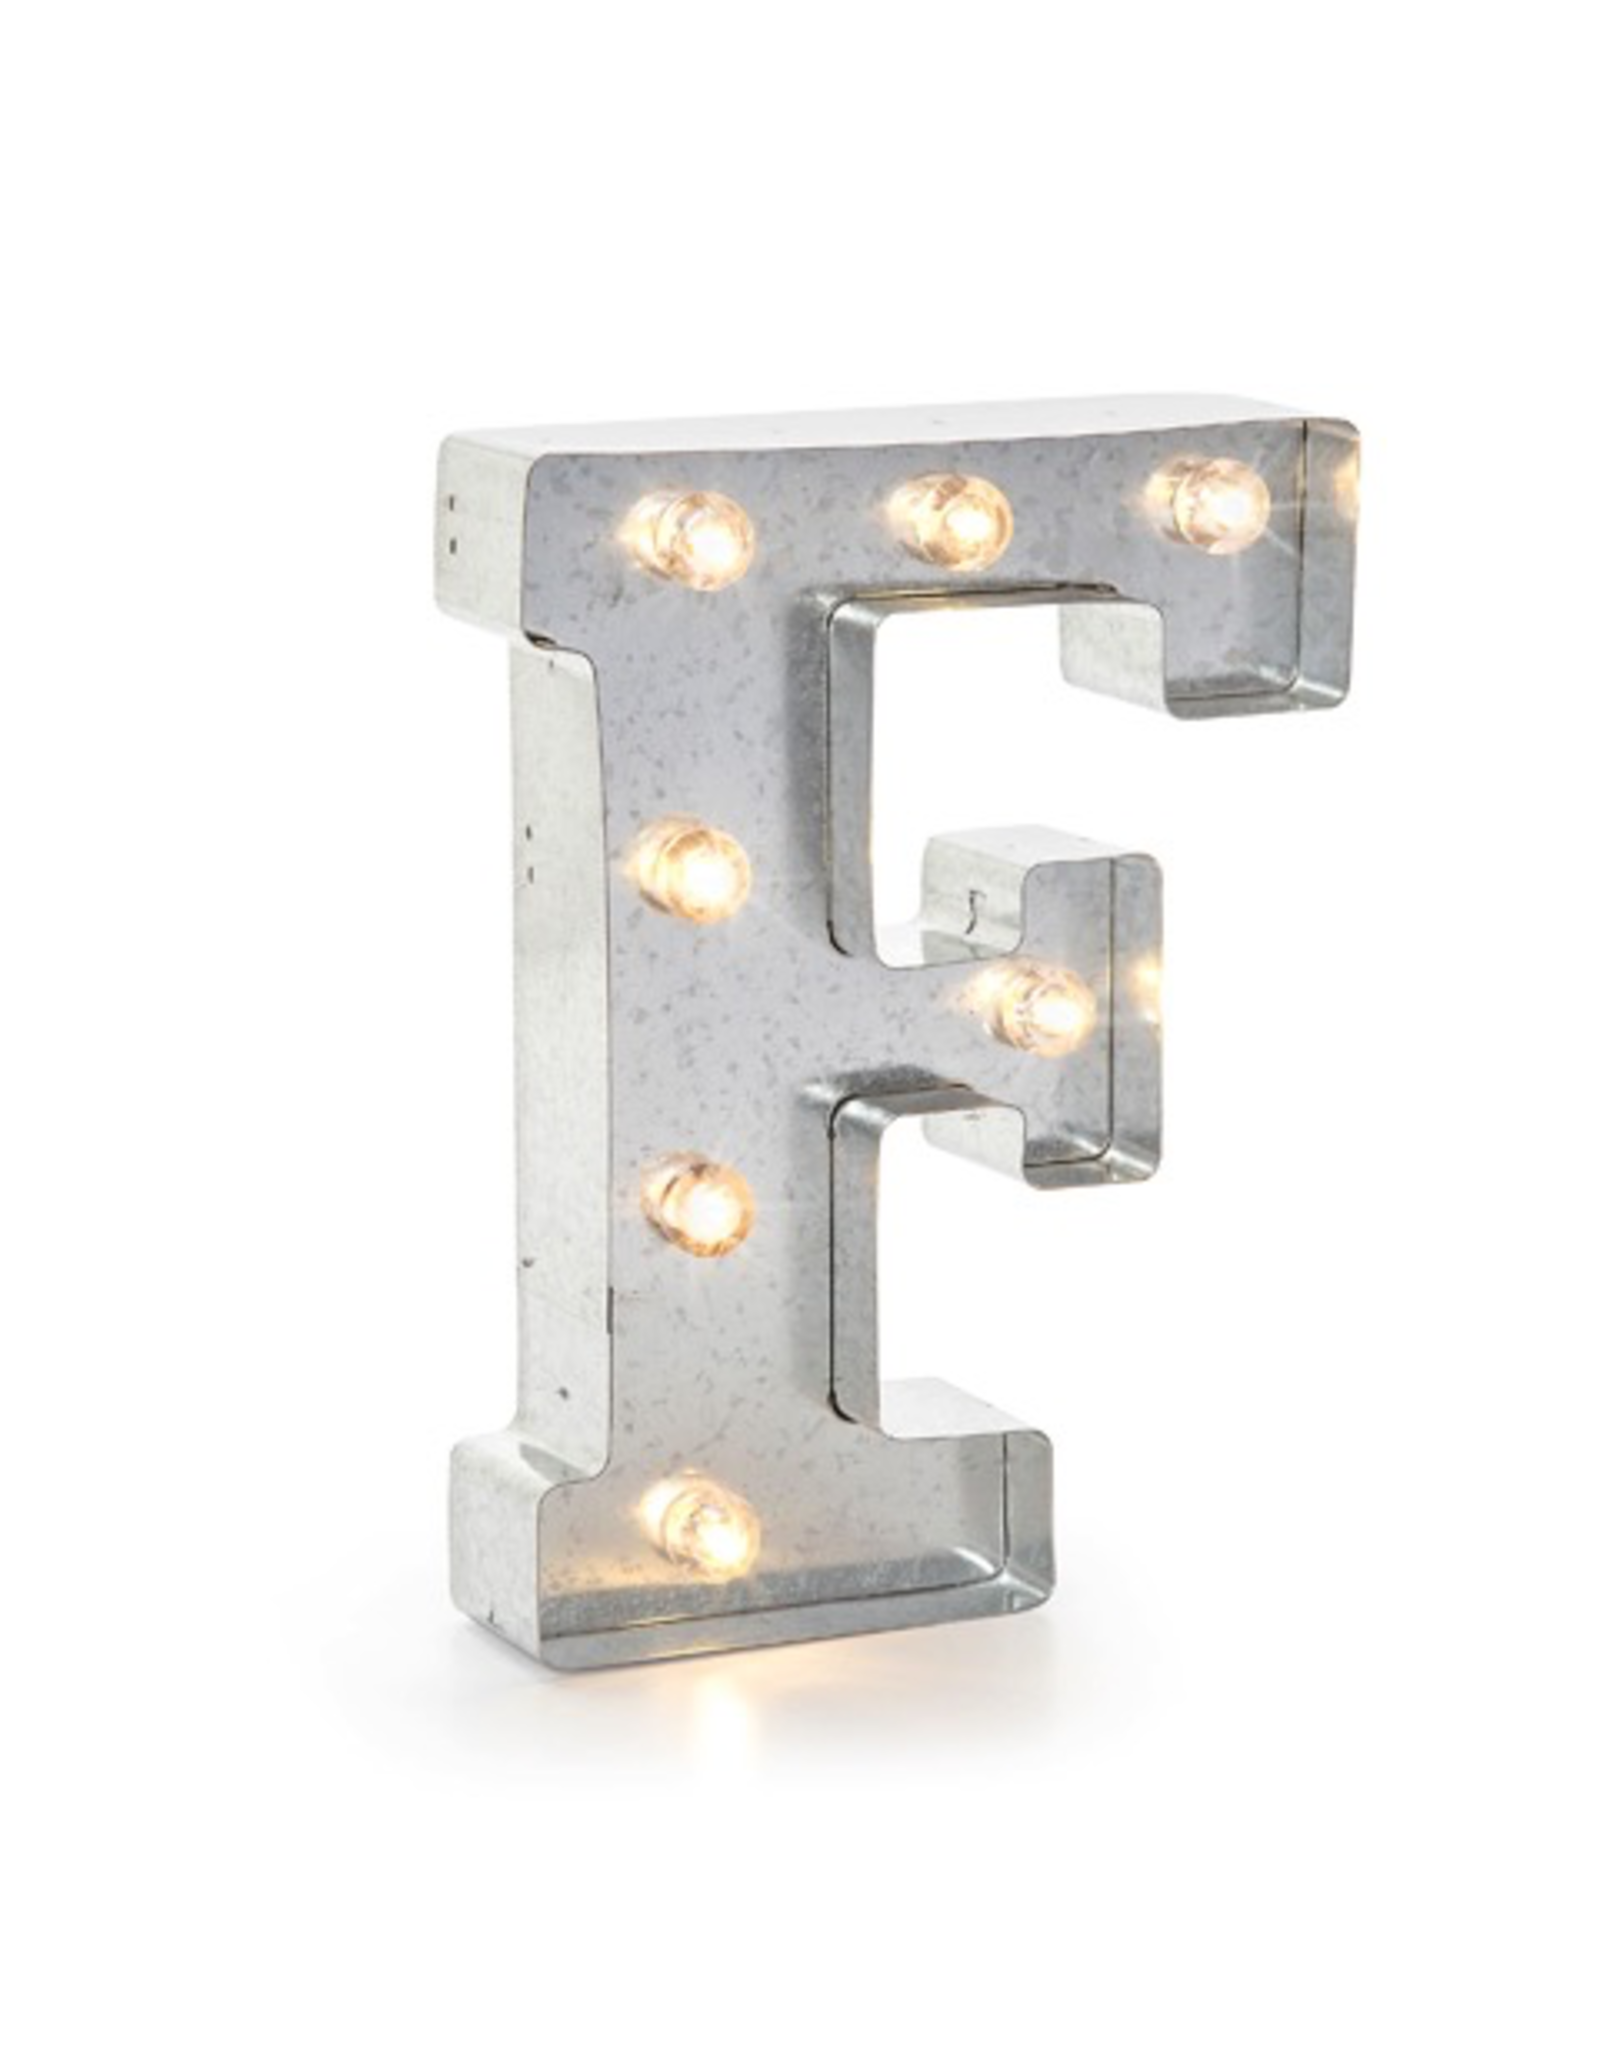 Darice LED Light Up Marquee Letter F 5915-707 Galvanized Silver Metal